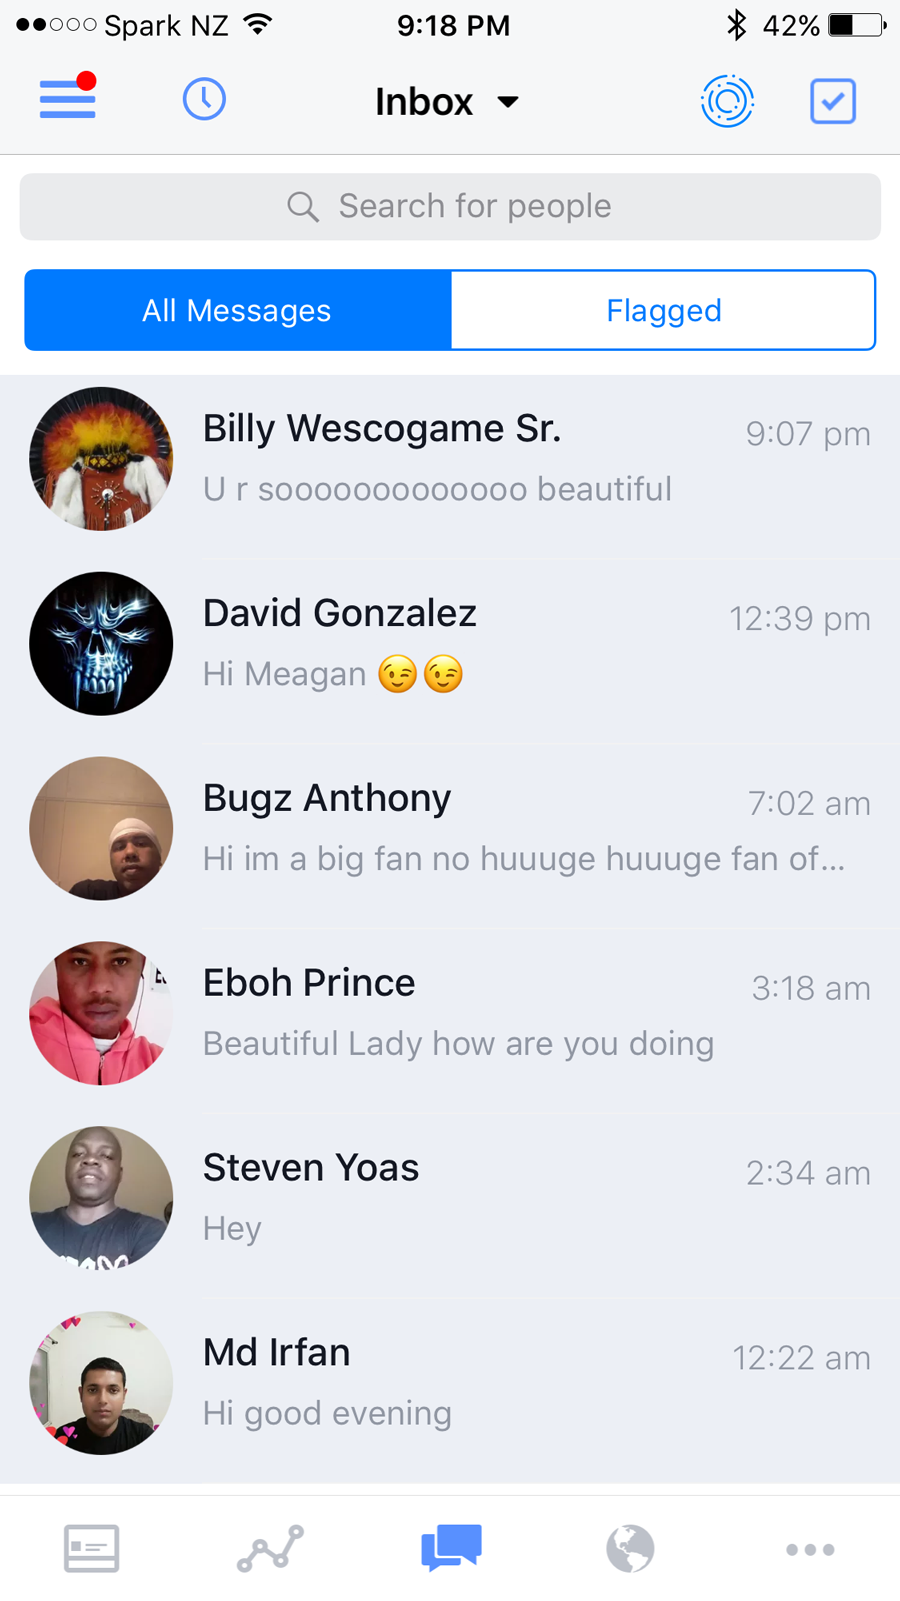 Online harassment: this is what my inbox looks like on a regular basis